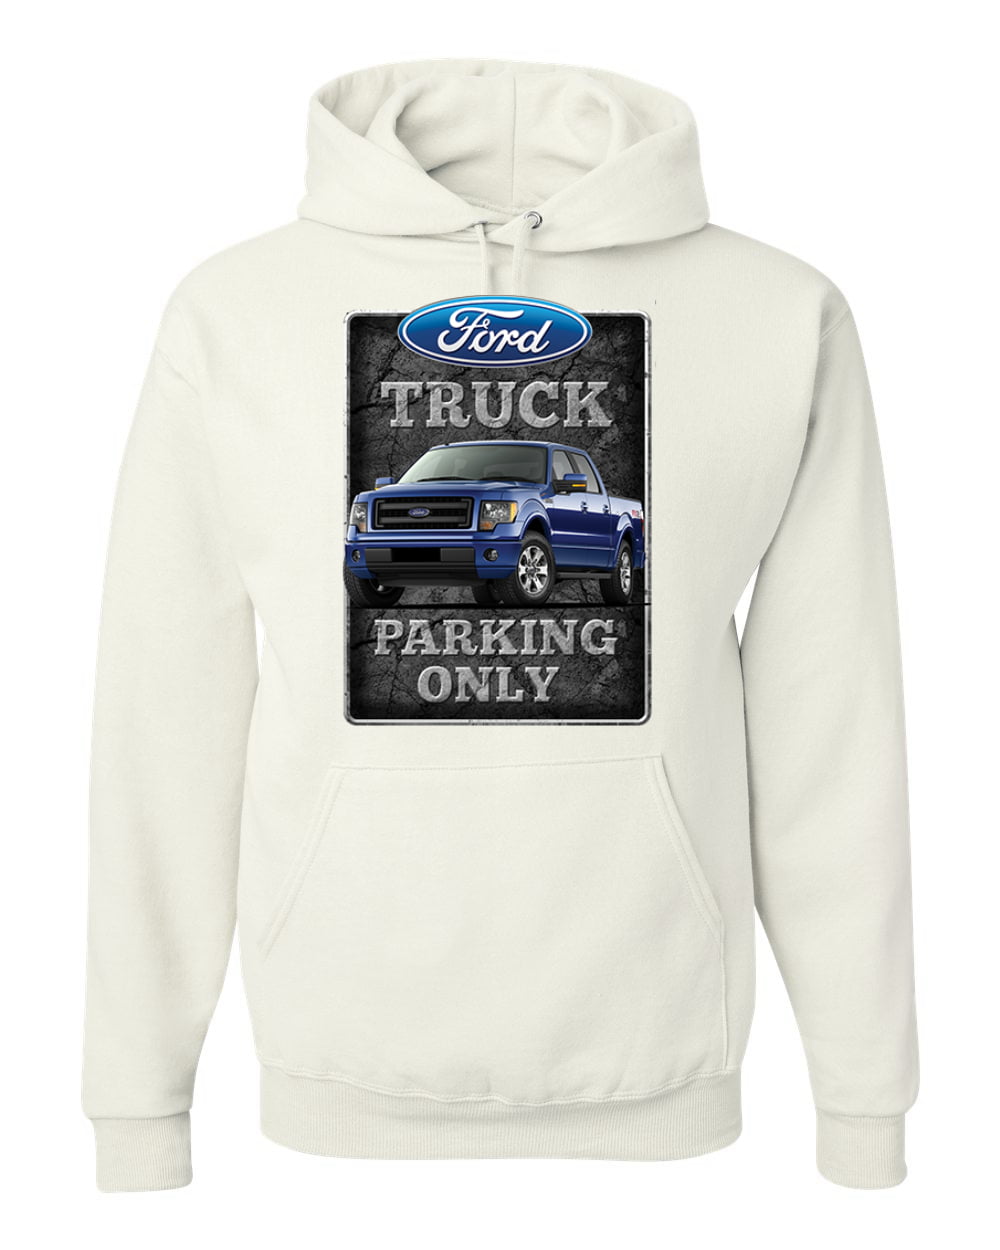 Ford Truck Parking Only Sweatshirt Pickup Truck Built Ford Tough Sweater